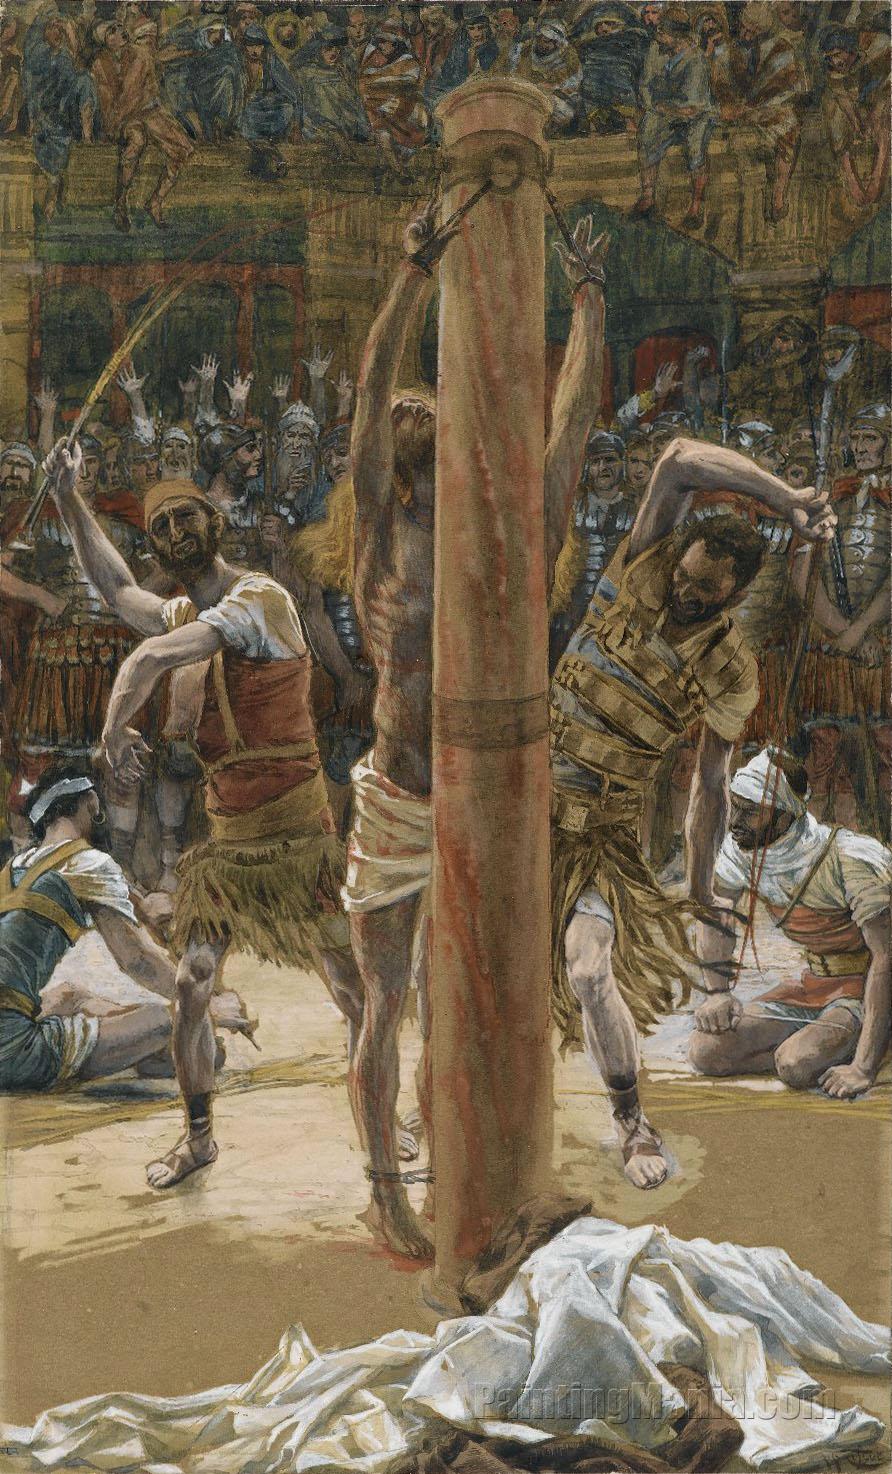 The Scourging on the Back (La flagellation de dos)